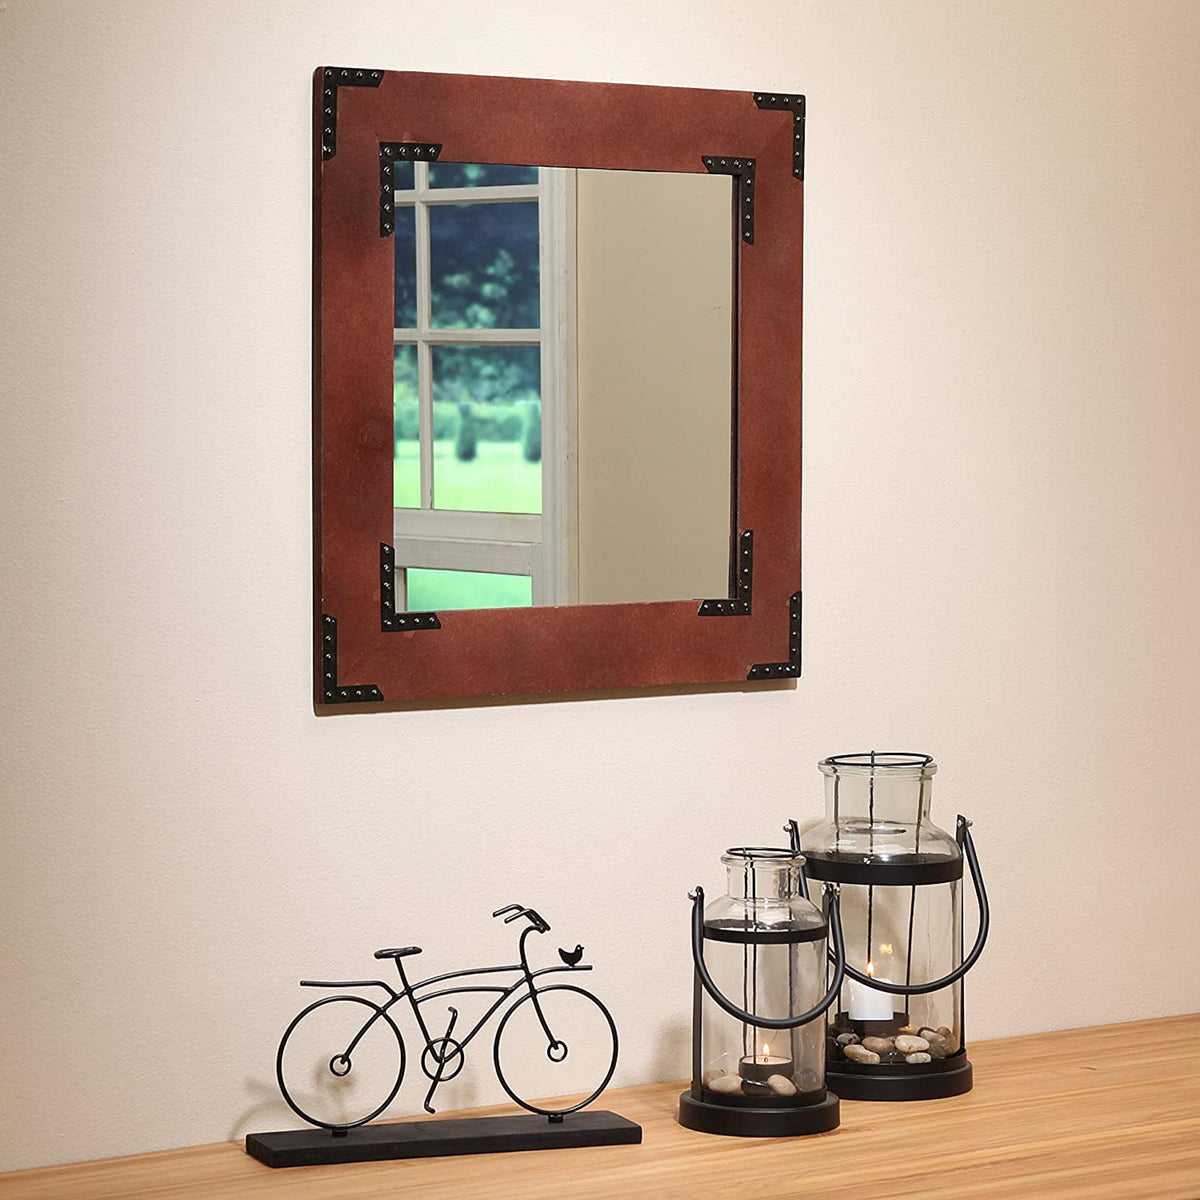 HOSLEY®  Wood Frame Mirror, 20 inches High